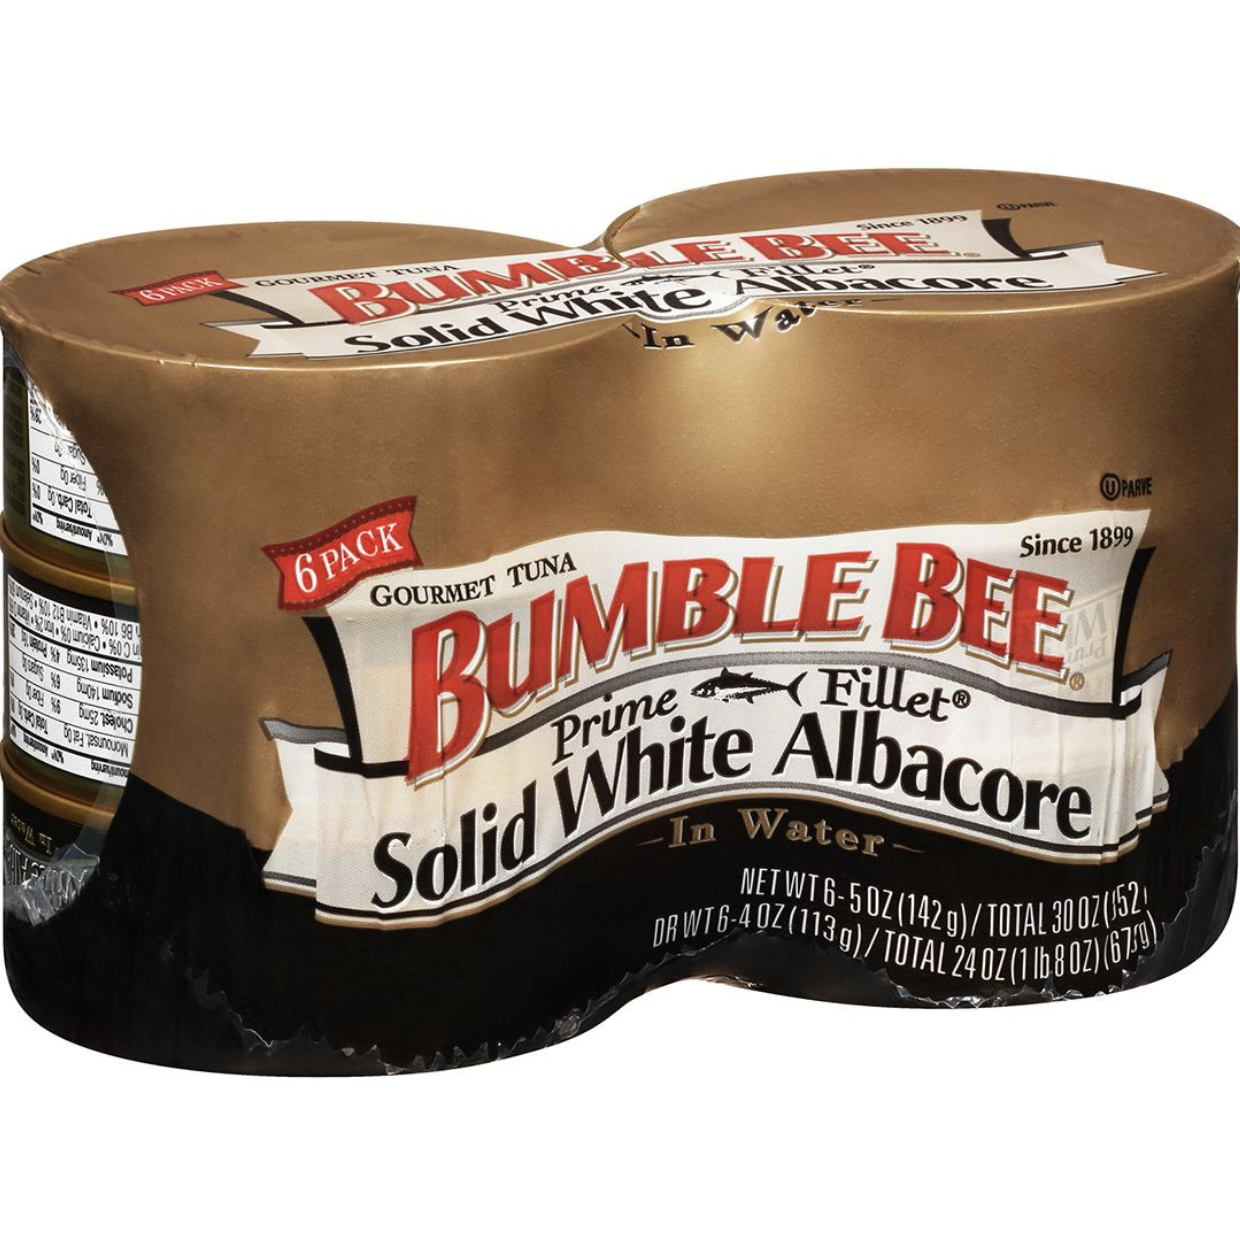 Bumble Bee Prime Fillet Solid White Albacore Tuna in Water, 6 pk